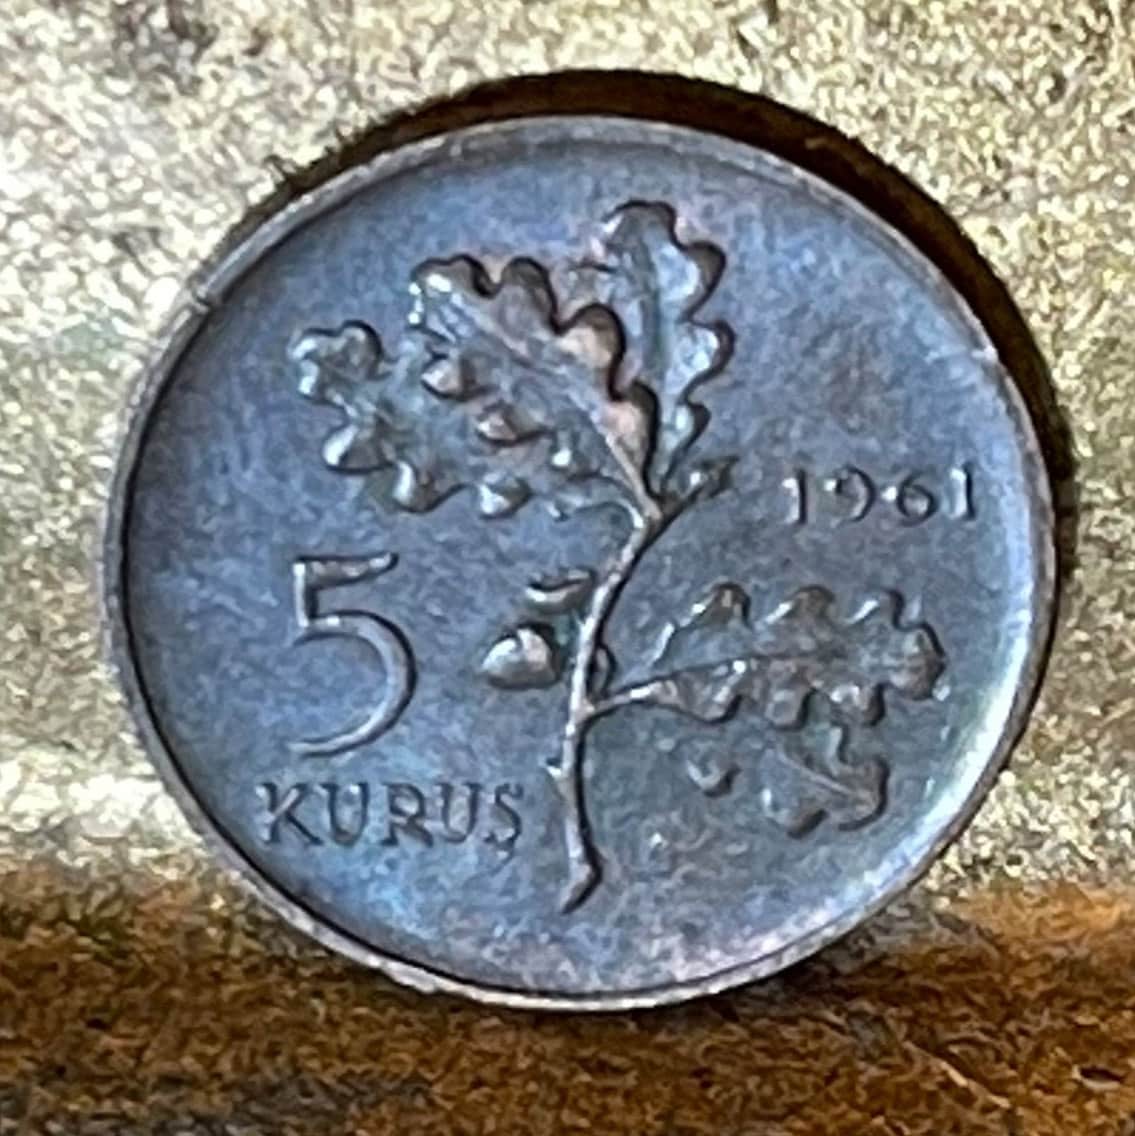 Oak Branch Turkey 5 Kurus Authentic Coin Money for Jewelry and Craft Making